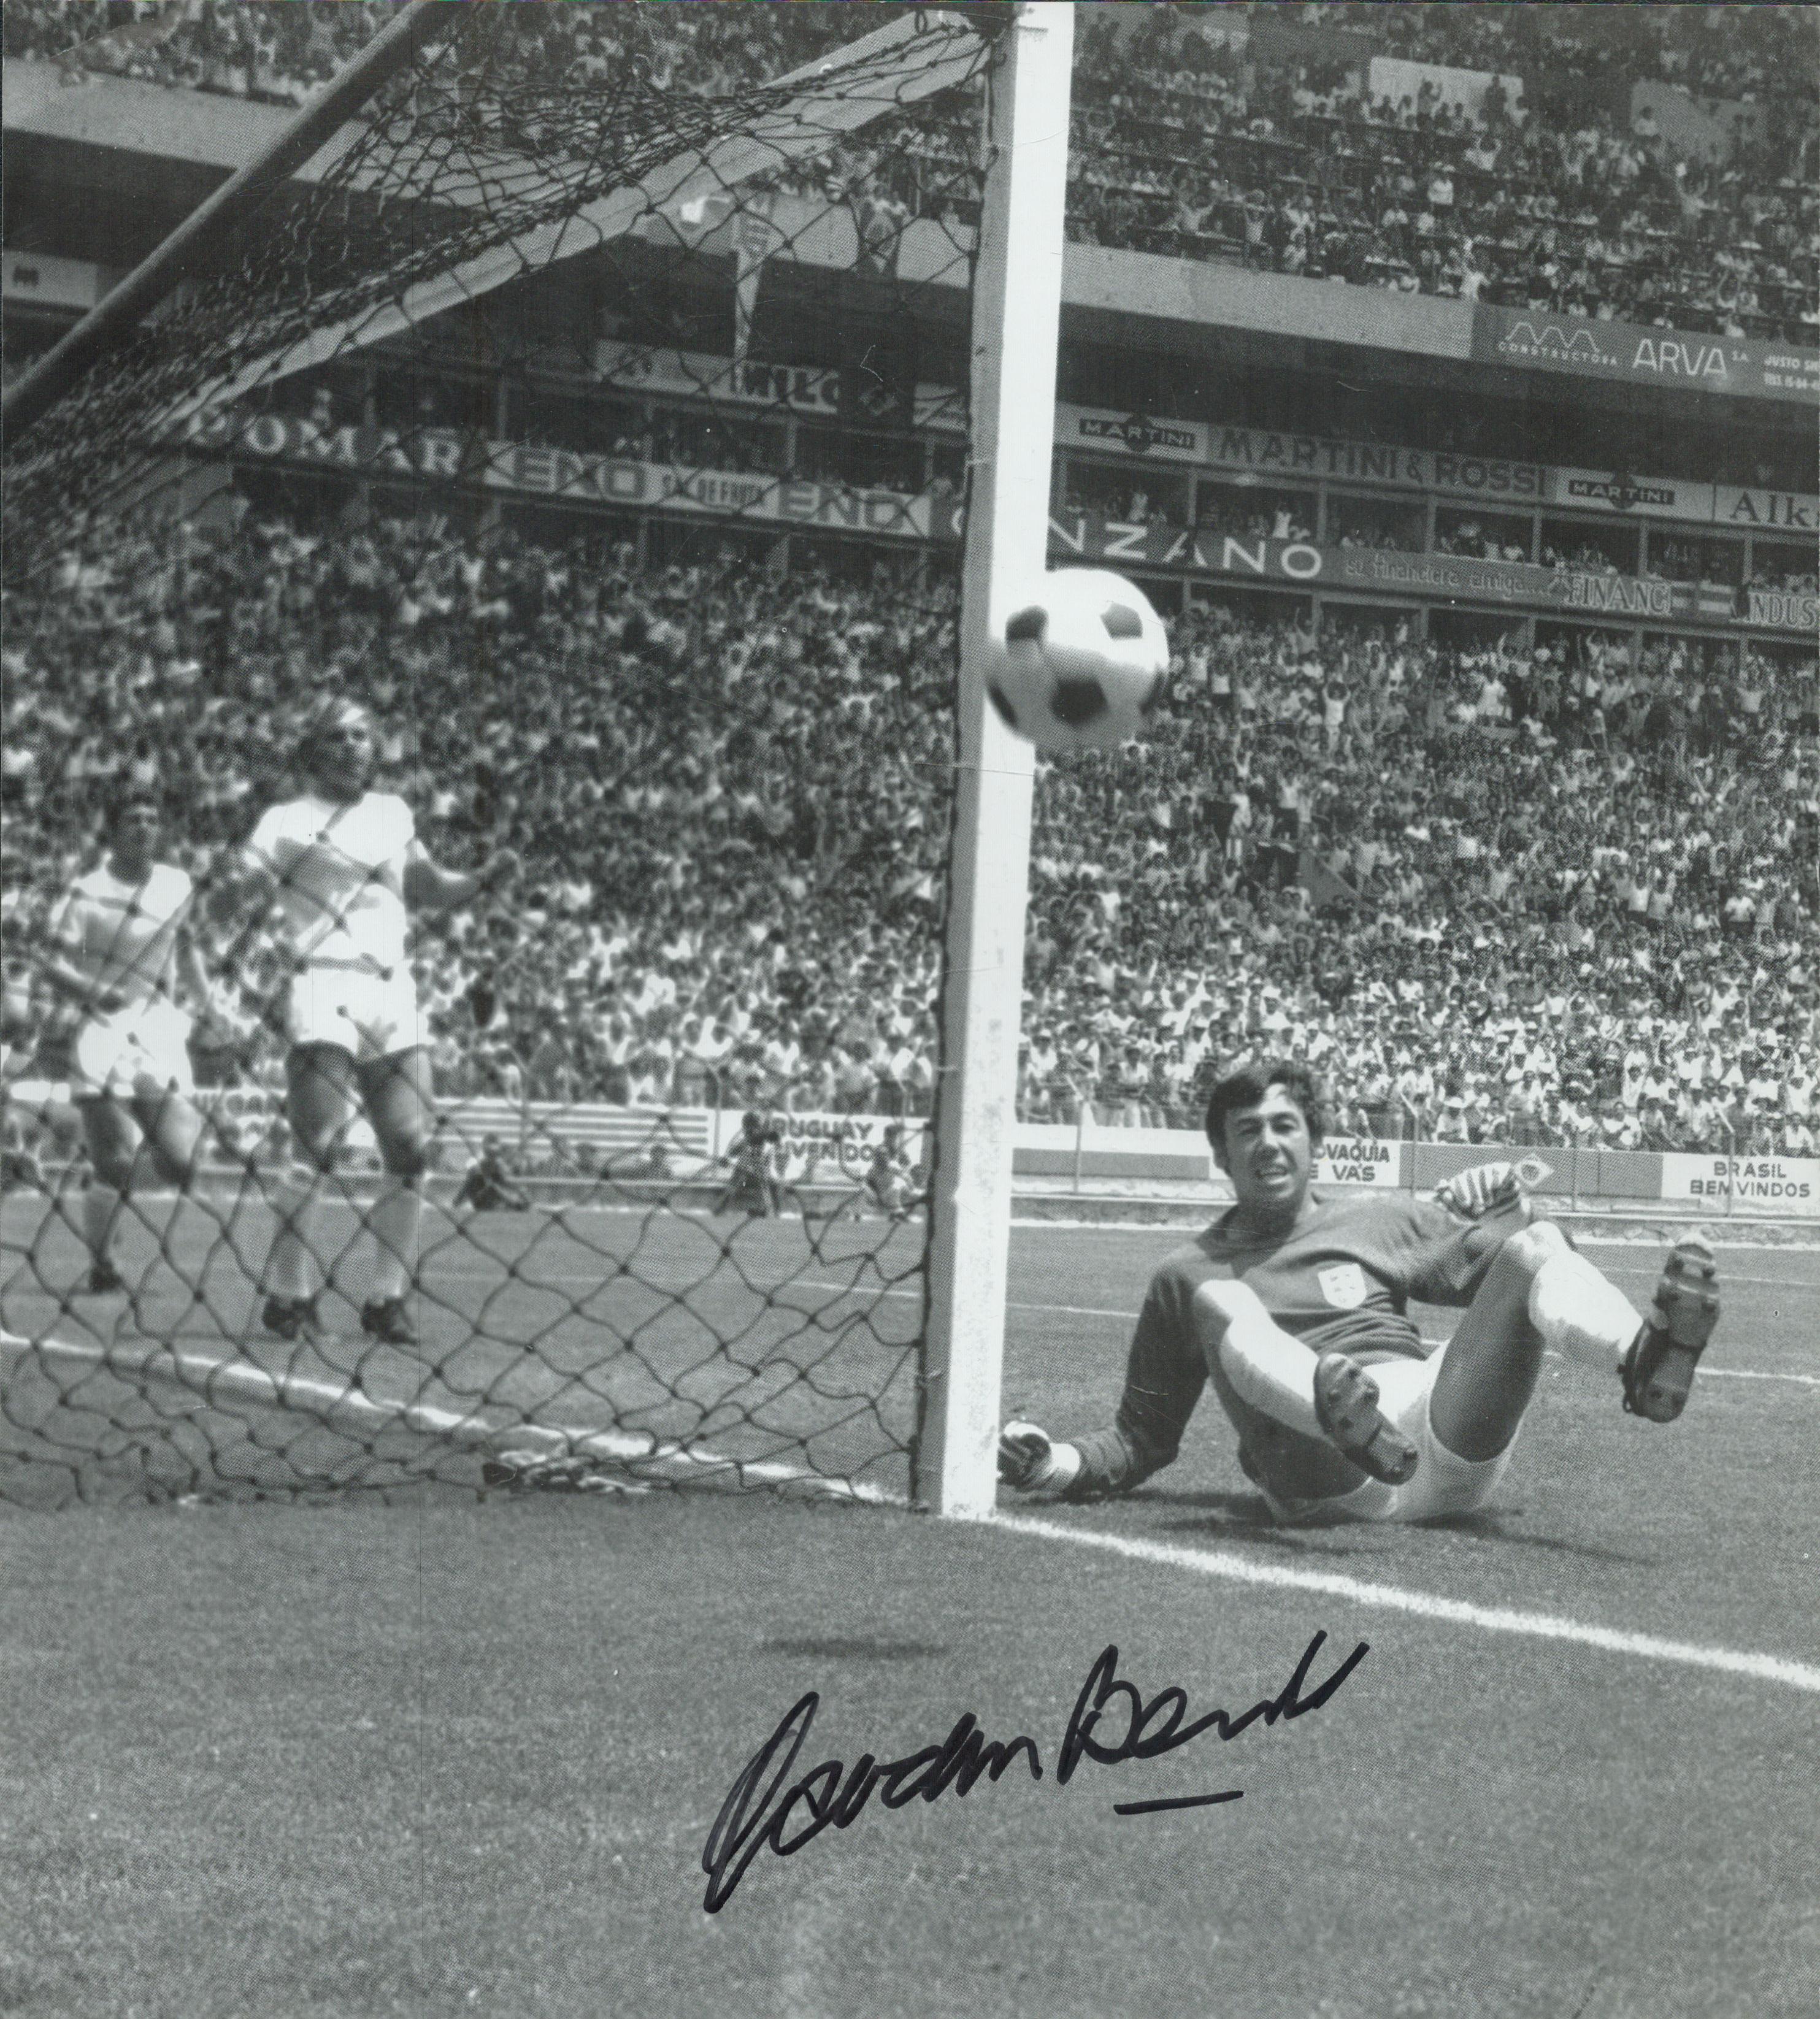 Gordon Banks signed 11x10 inch black and white photo pictured after the miracle save from Pele